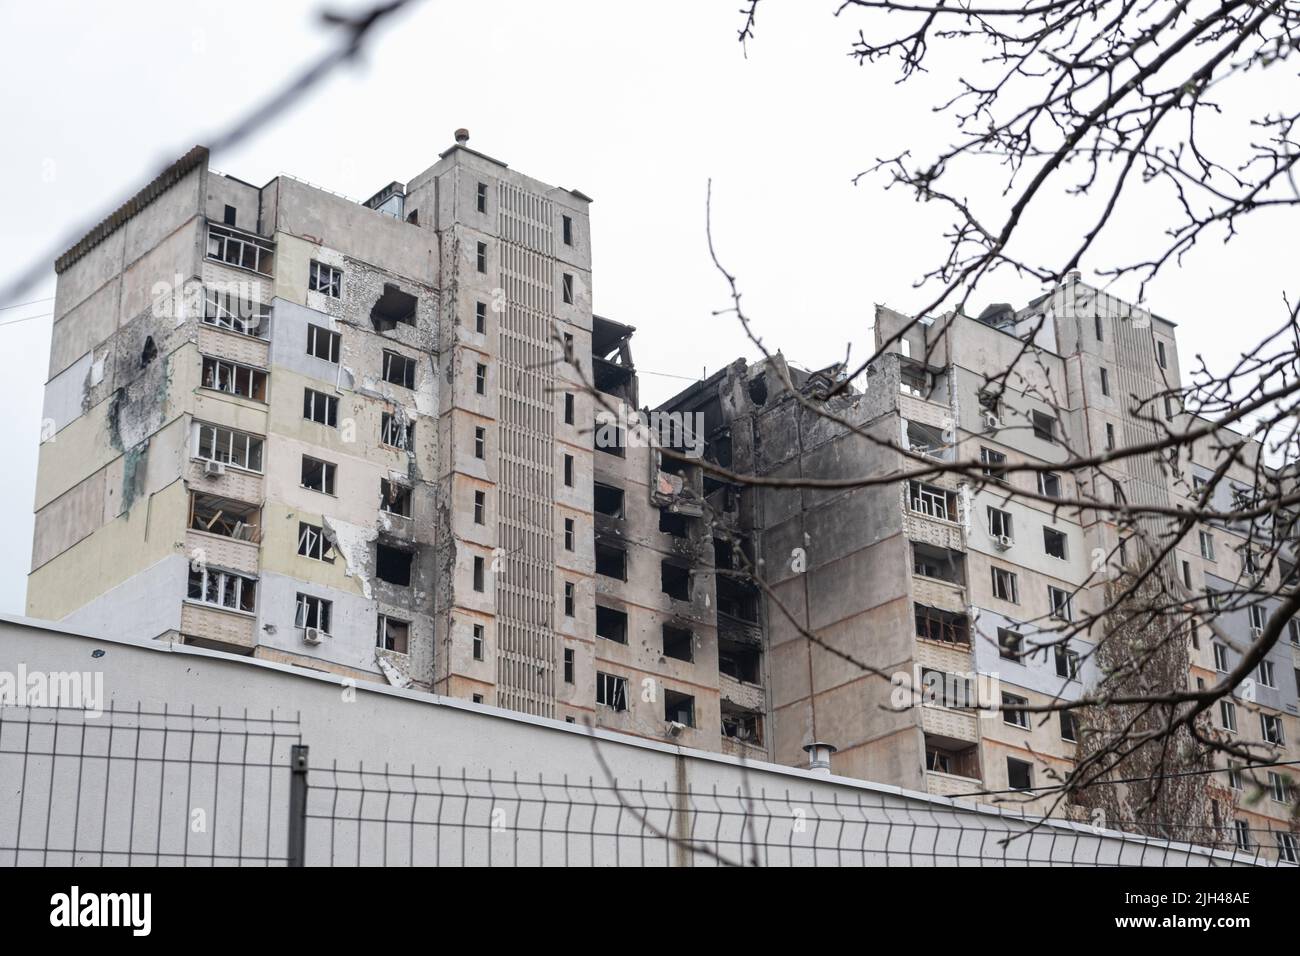 War in Ukraine 2022. Destroyed, bombed and burned residential building after Russian missiles in Kharkiv Ukraine. Russian aggression, conflict Stock Photo